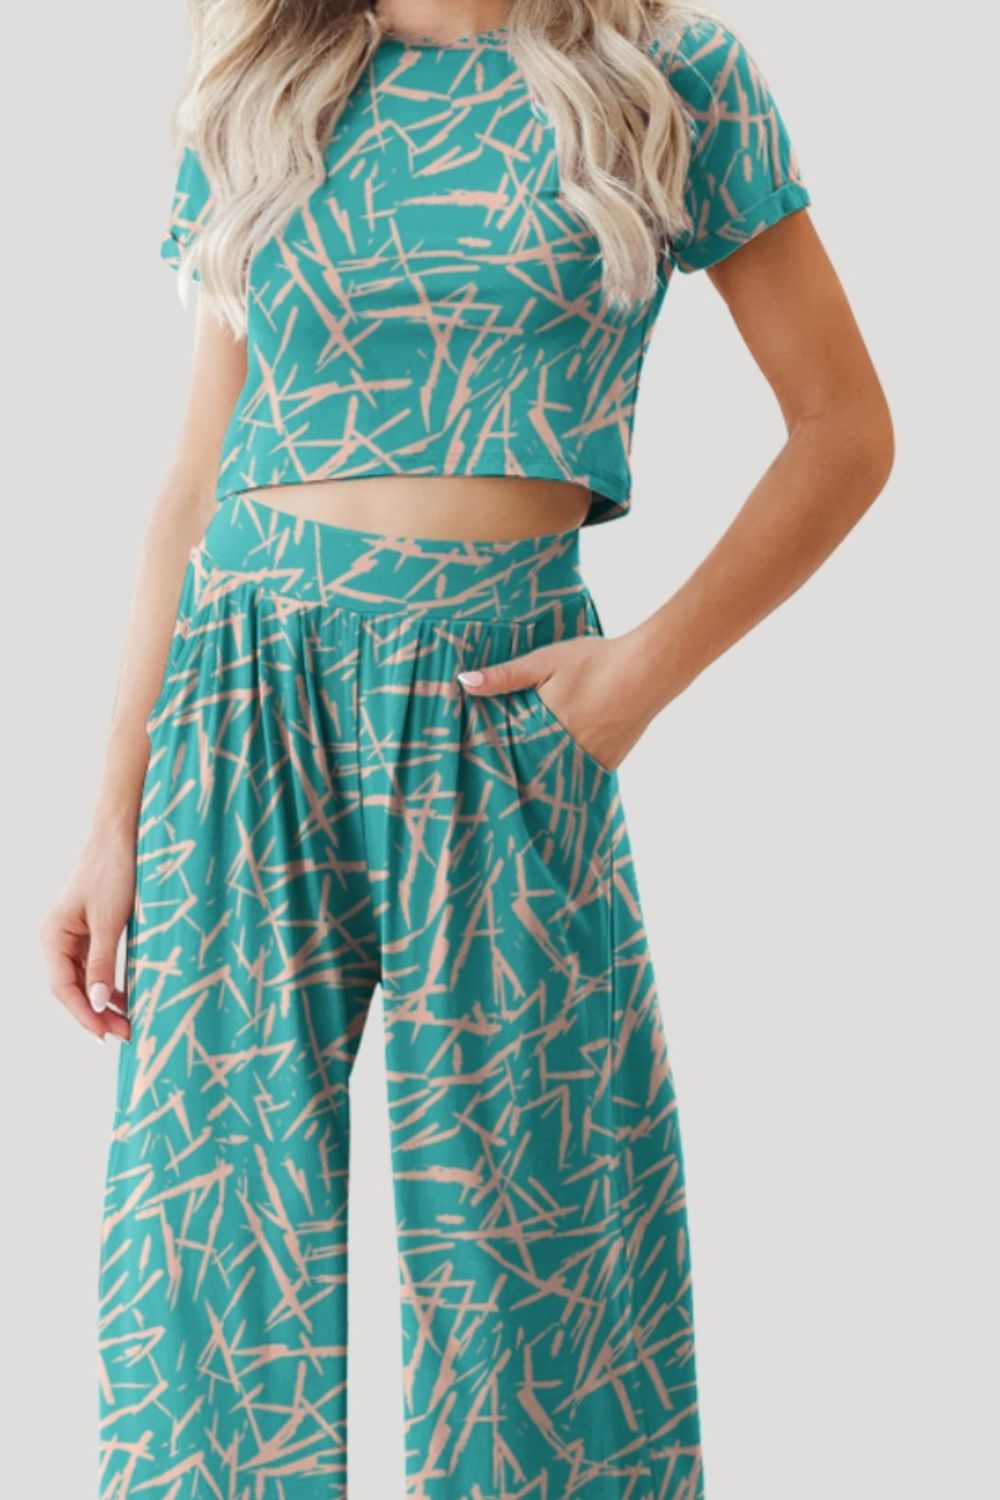 STUNNLY  Printed Round Neck Short Sleeve Top and Pants Set   